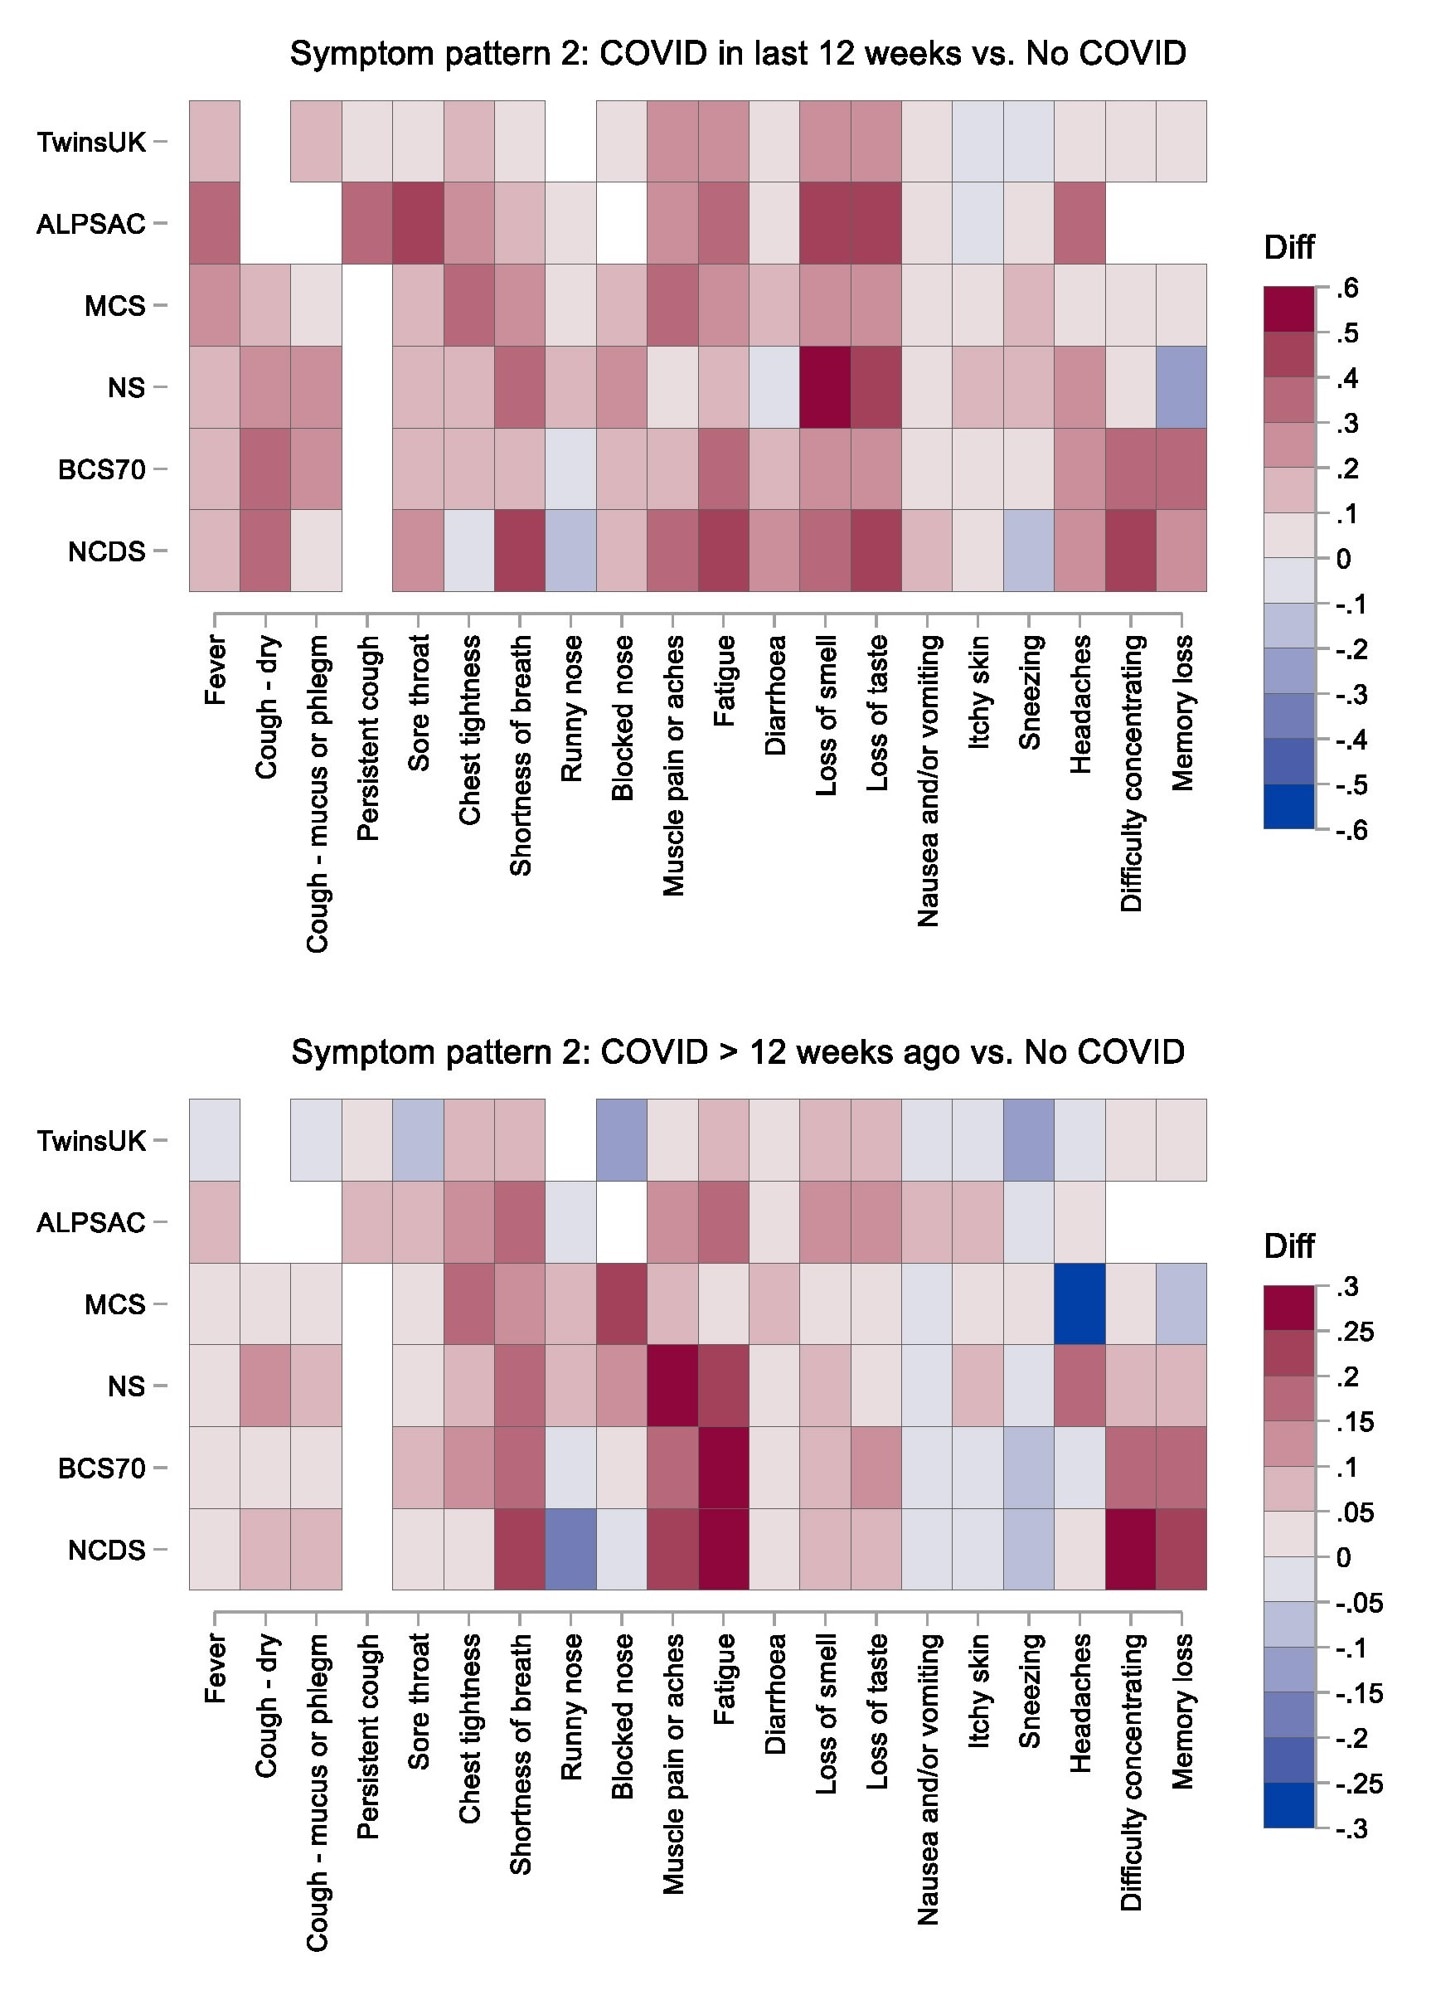 Heatmap of symptom probability differences comparing the two COVID-19 groups with the no COVID-19 group across all studies. NCDS: 1958 National Child Development Study; BCS1970: 1970 British Cohort Study; NS: Next Steps; MCS: Millennium Cohort Study; ALSPAC: Avon Longitudinal Study of Parents and Children. Notes: White cells indicate that the symptom was not asked about in in that study; ALSPAC results for “loss of smell or taste” are duplicated in the “loss of smell” and “loss of taste” cells; TwinsUK results for “confusion” are duplicated in the “difficulty concentrating” and “memory loss” cells.